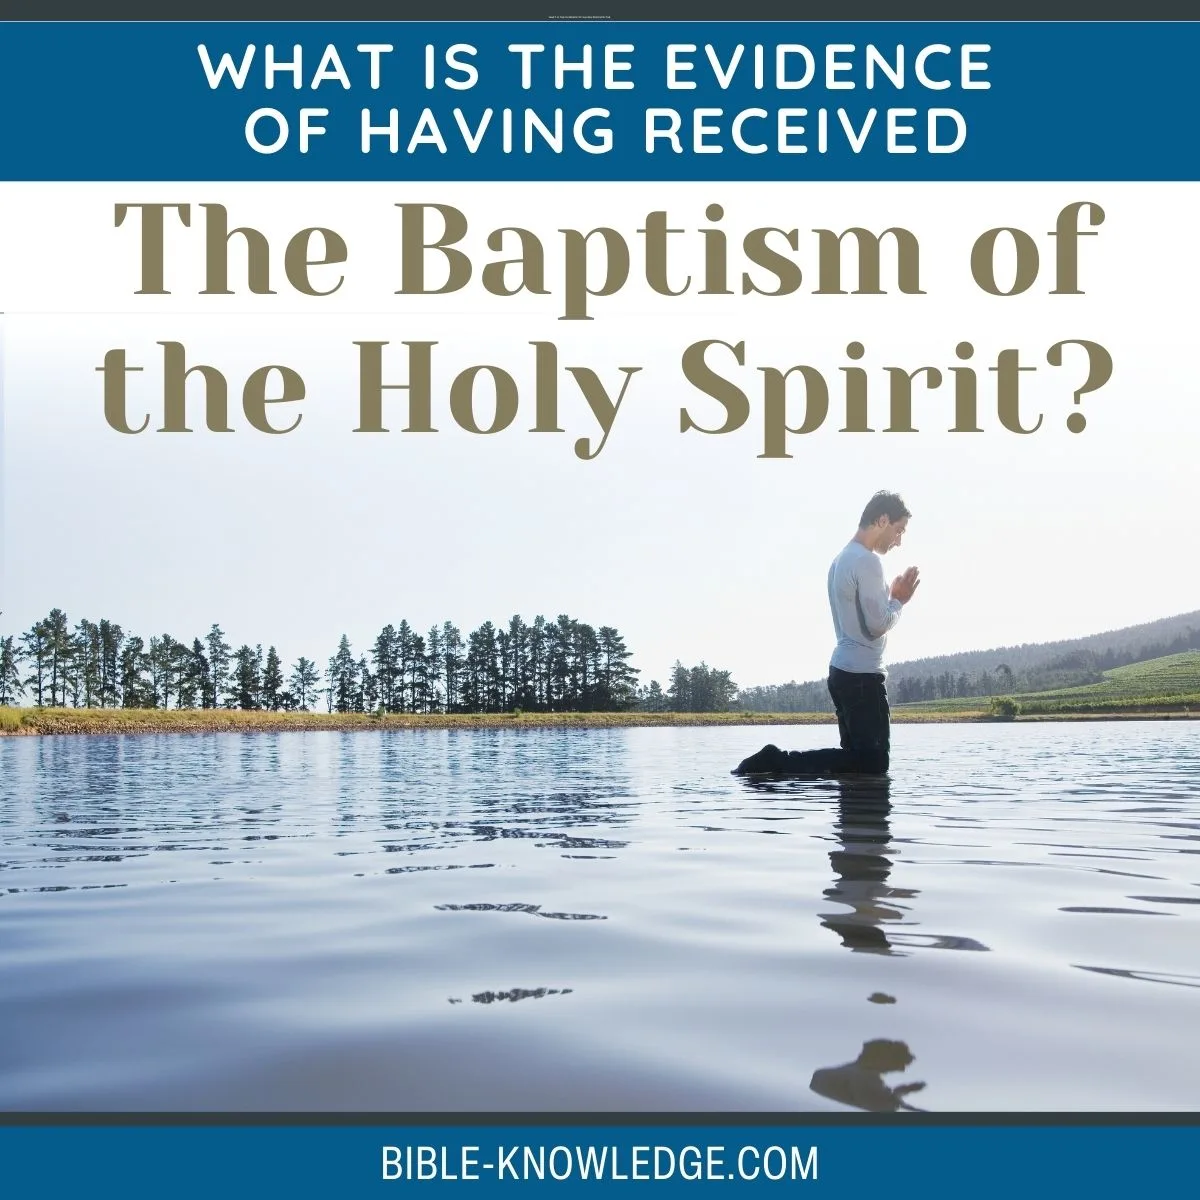 What is the Evidence of Having Received the Baptism of the Holy Spirit?